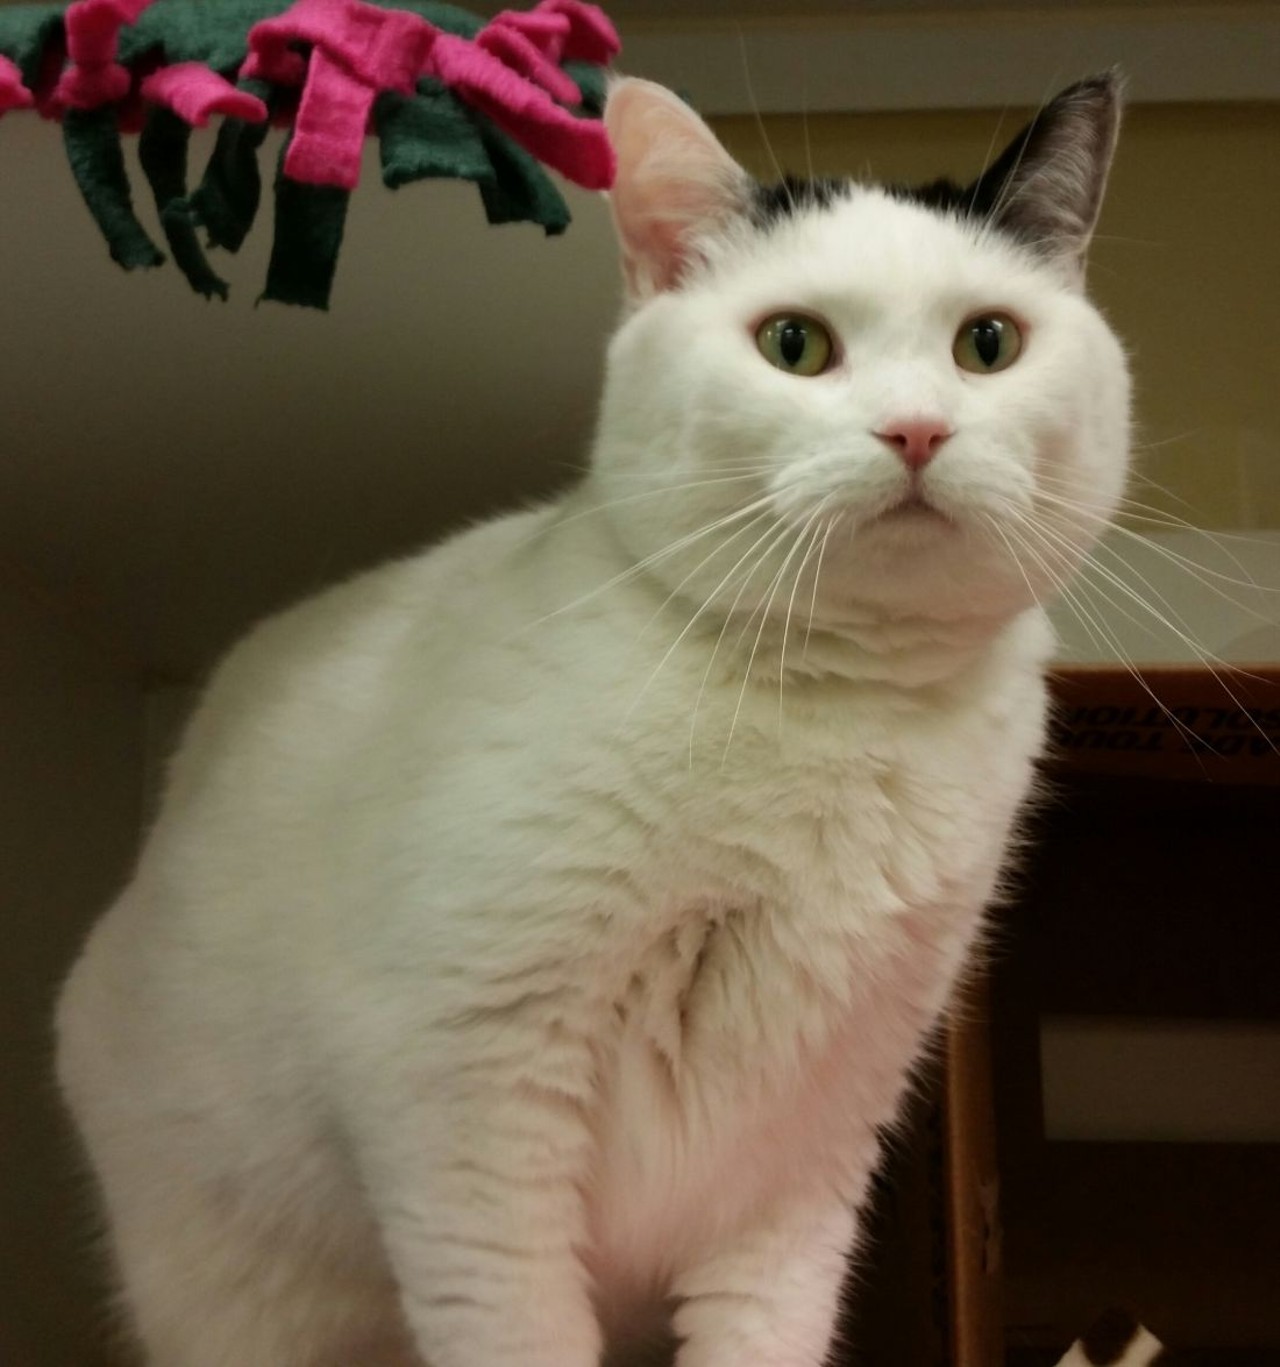 NAME: Pringle
GENDER: Female
BREED: Domestic Short Hair
AGE: 2 years, 2 months
WEIGHT: 13 pounds
SPECIAL CONSIDERATIONS: None
REASON I CAME TO MHS: Death of owner
LOCATION: Petco of Sterling Heights
ID NUMBER: 866164